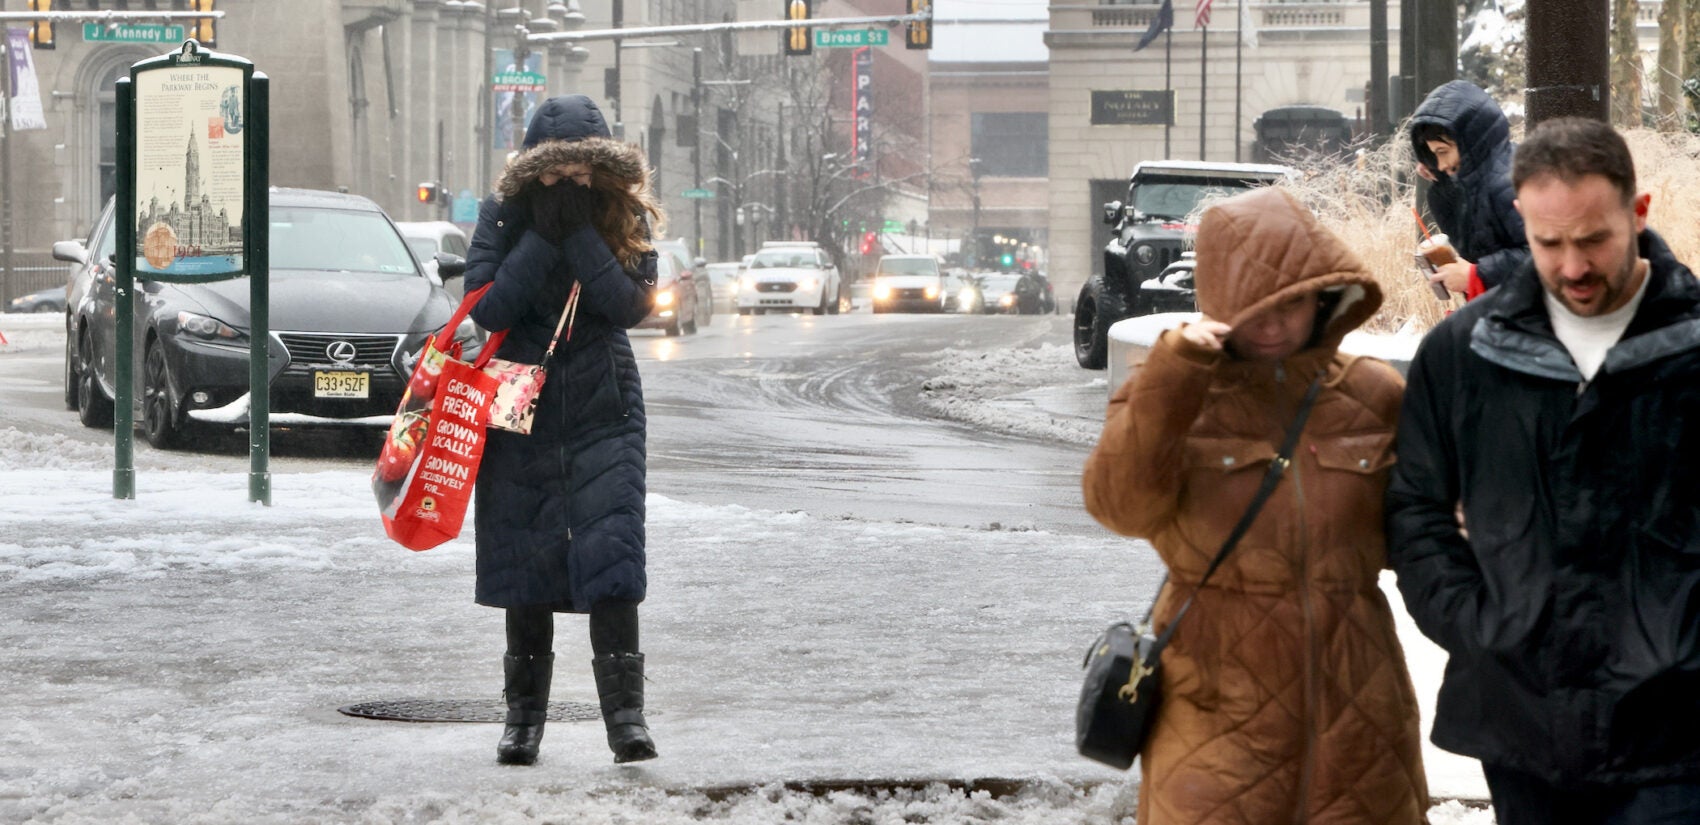 Pedestrians in Philadelphia struggling to walk on sidewalks coated with ice and snow.